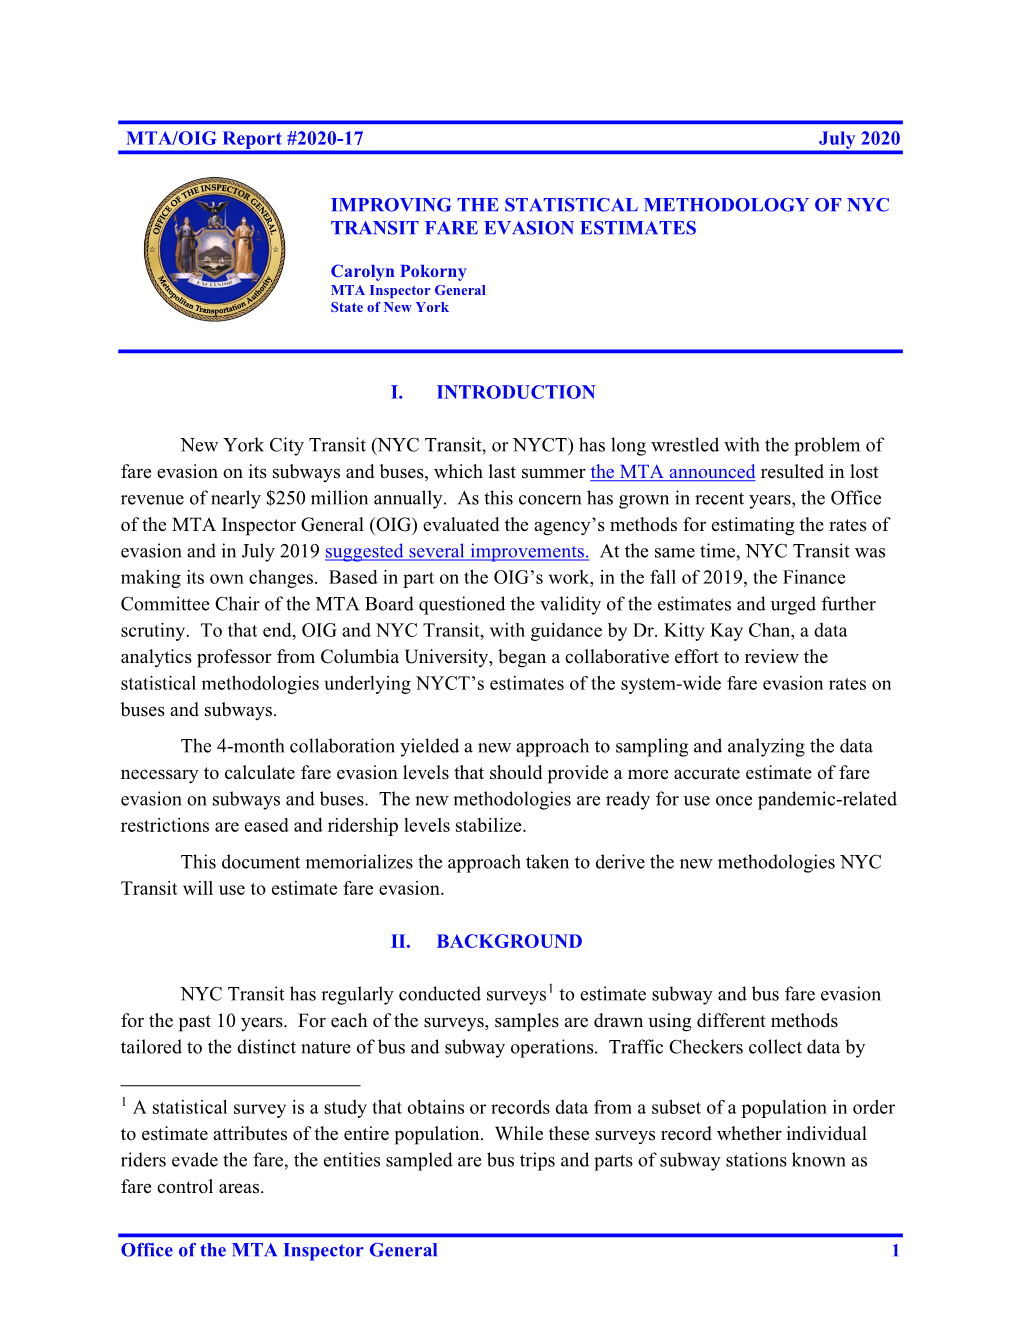 Office of the MTA Inspector General MTA/OIG Report #2020-17 July